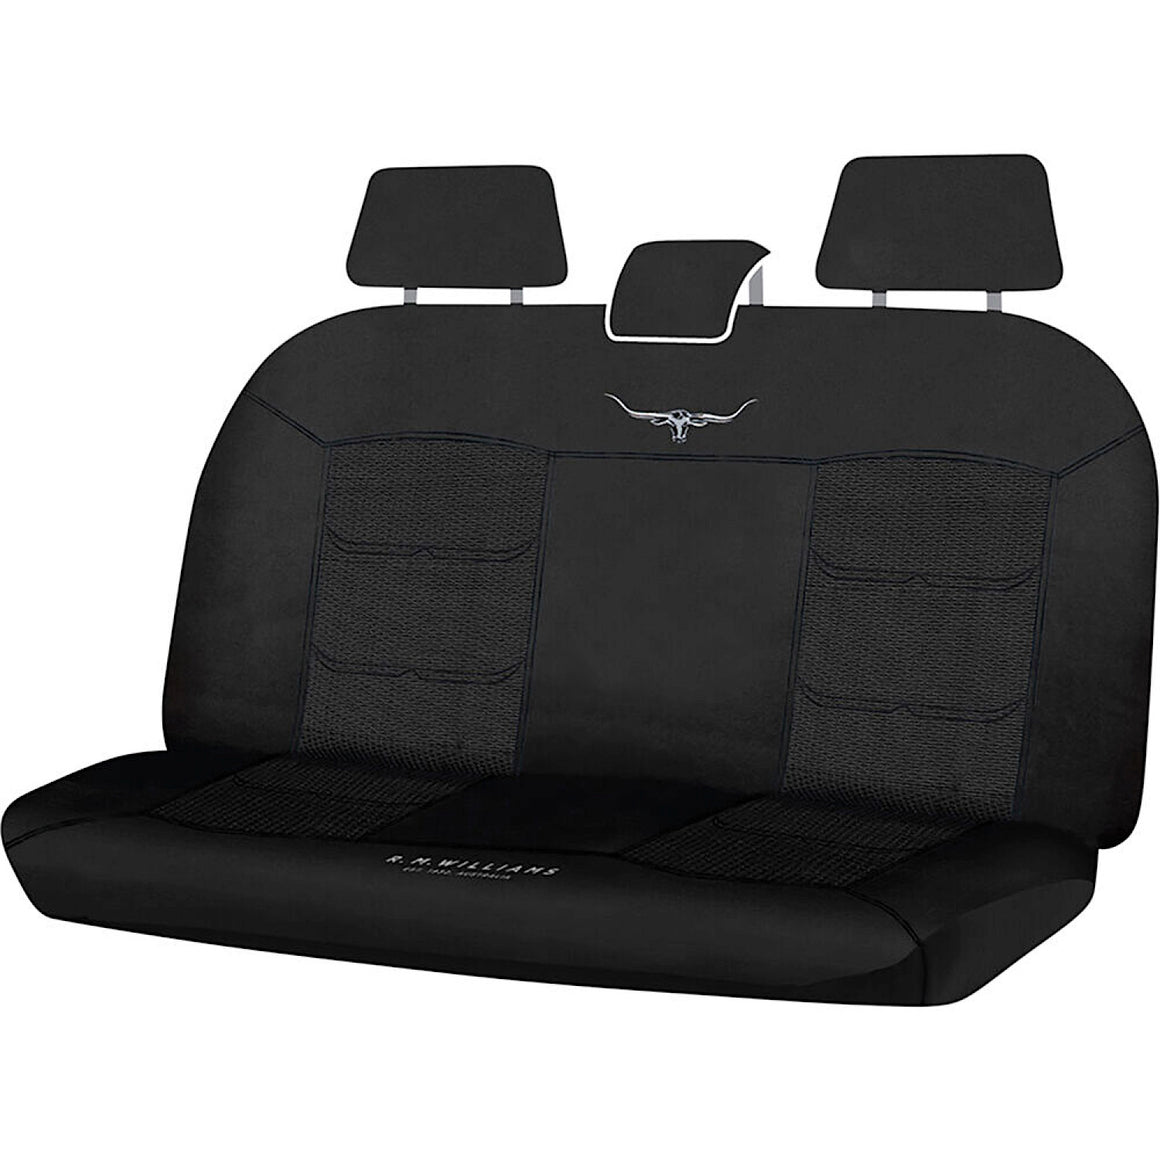 R.M.Williams Woven Jacquard Rear Seat Covers Black Size 06